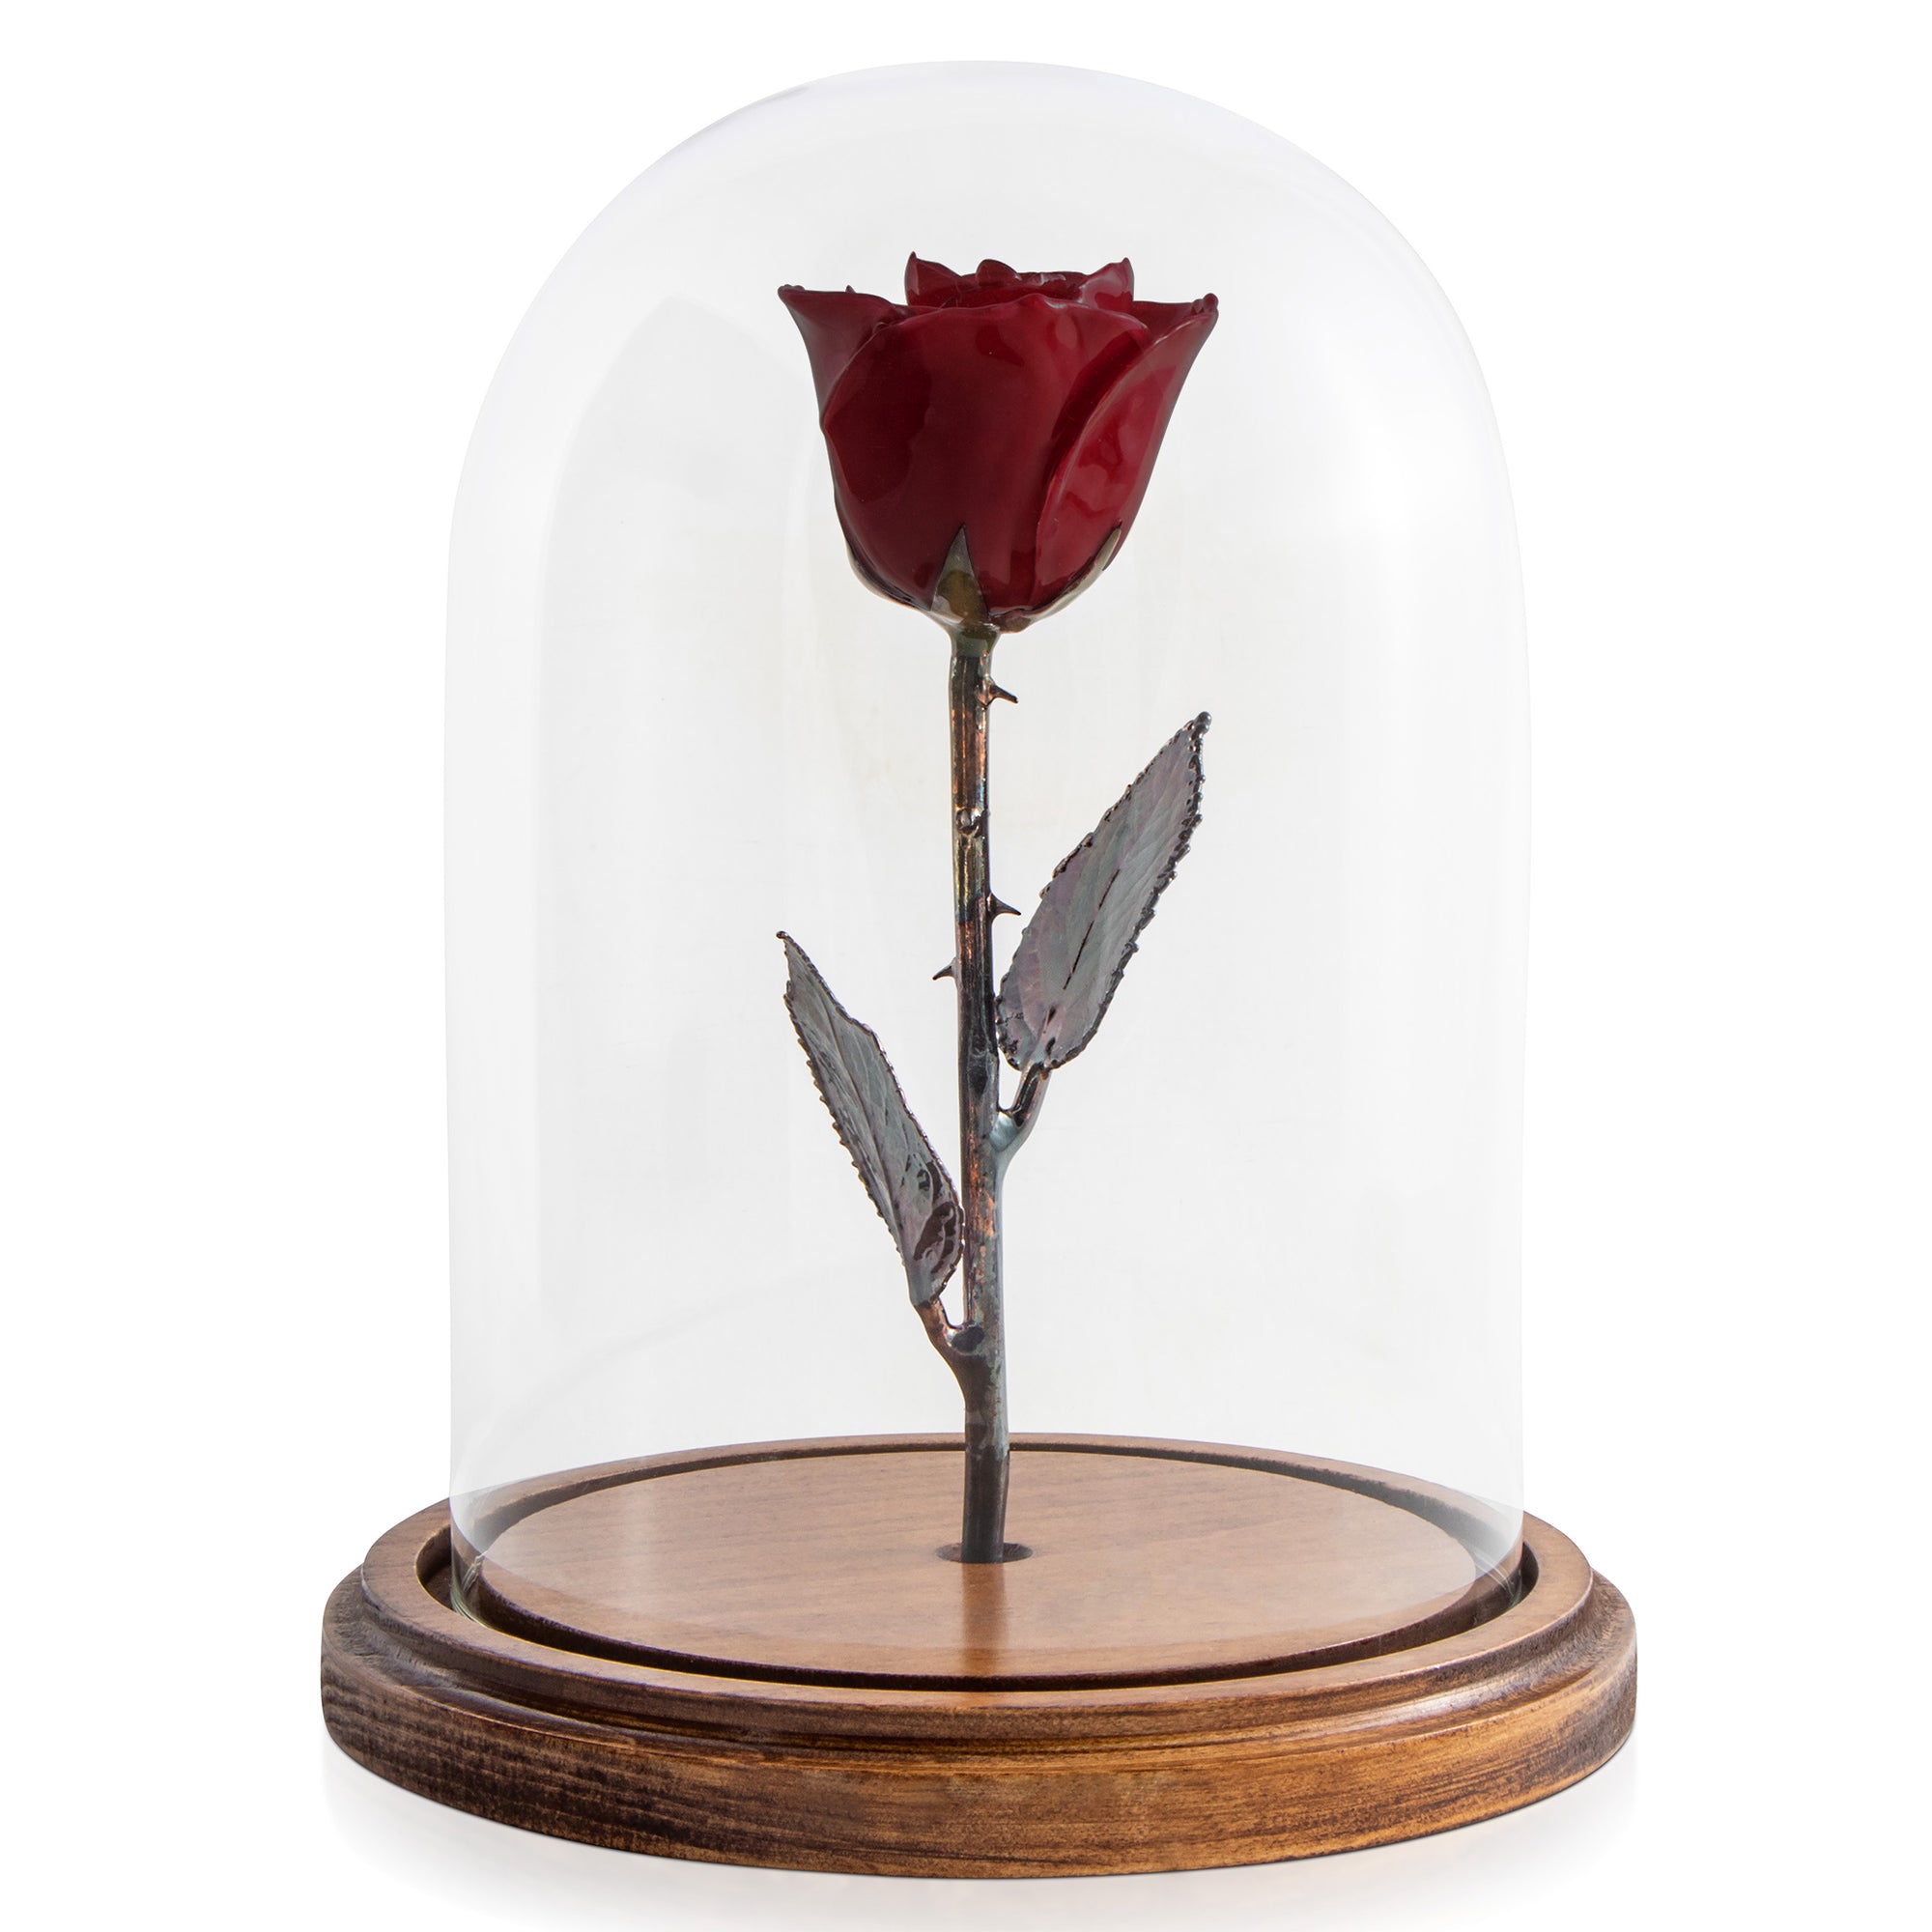 Burgundy Enchanted Rose (aka Beauty & The Beast Rose) with Patina Copper Stem Mounted to A Hand Turned Solid Wood Base under a glass dome.